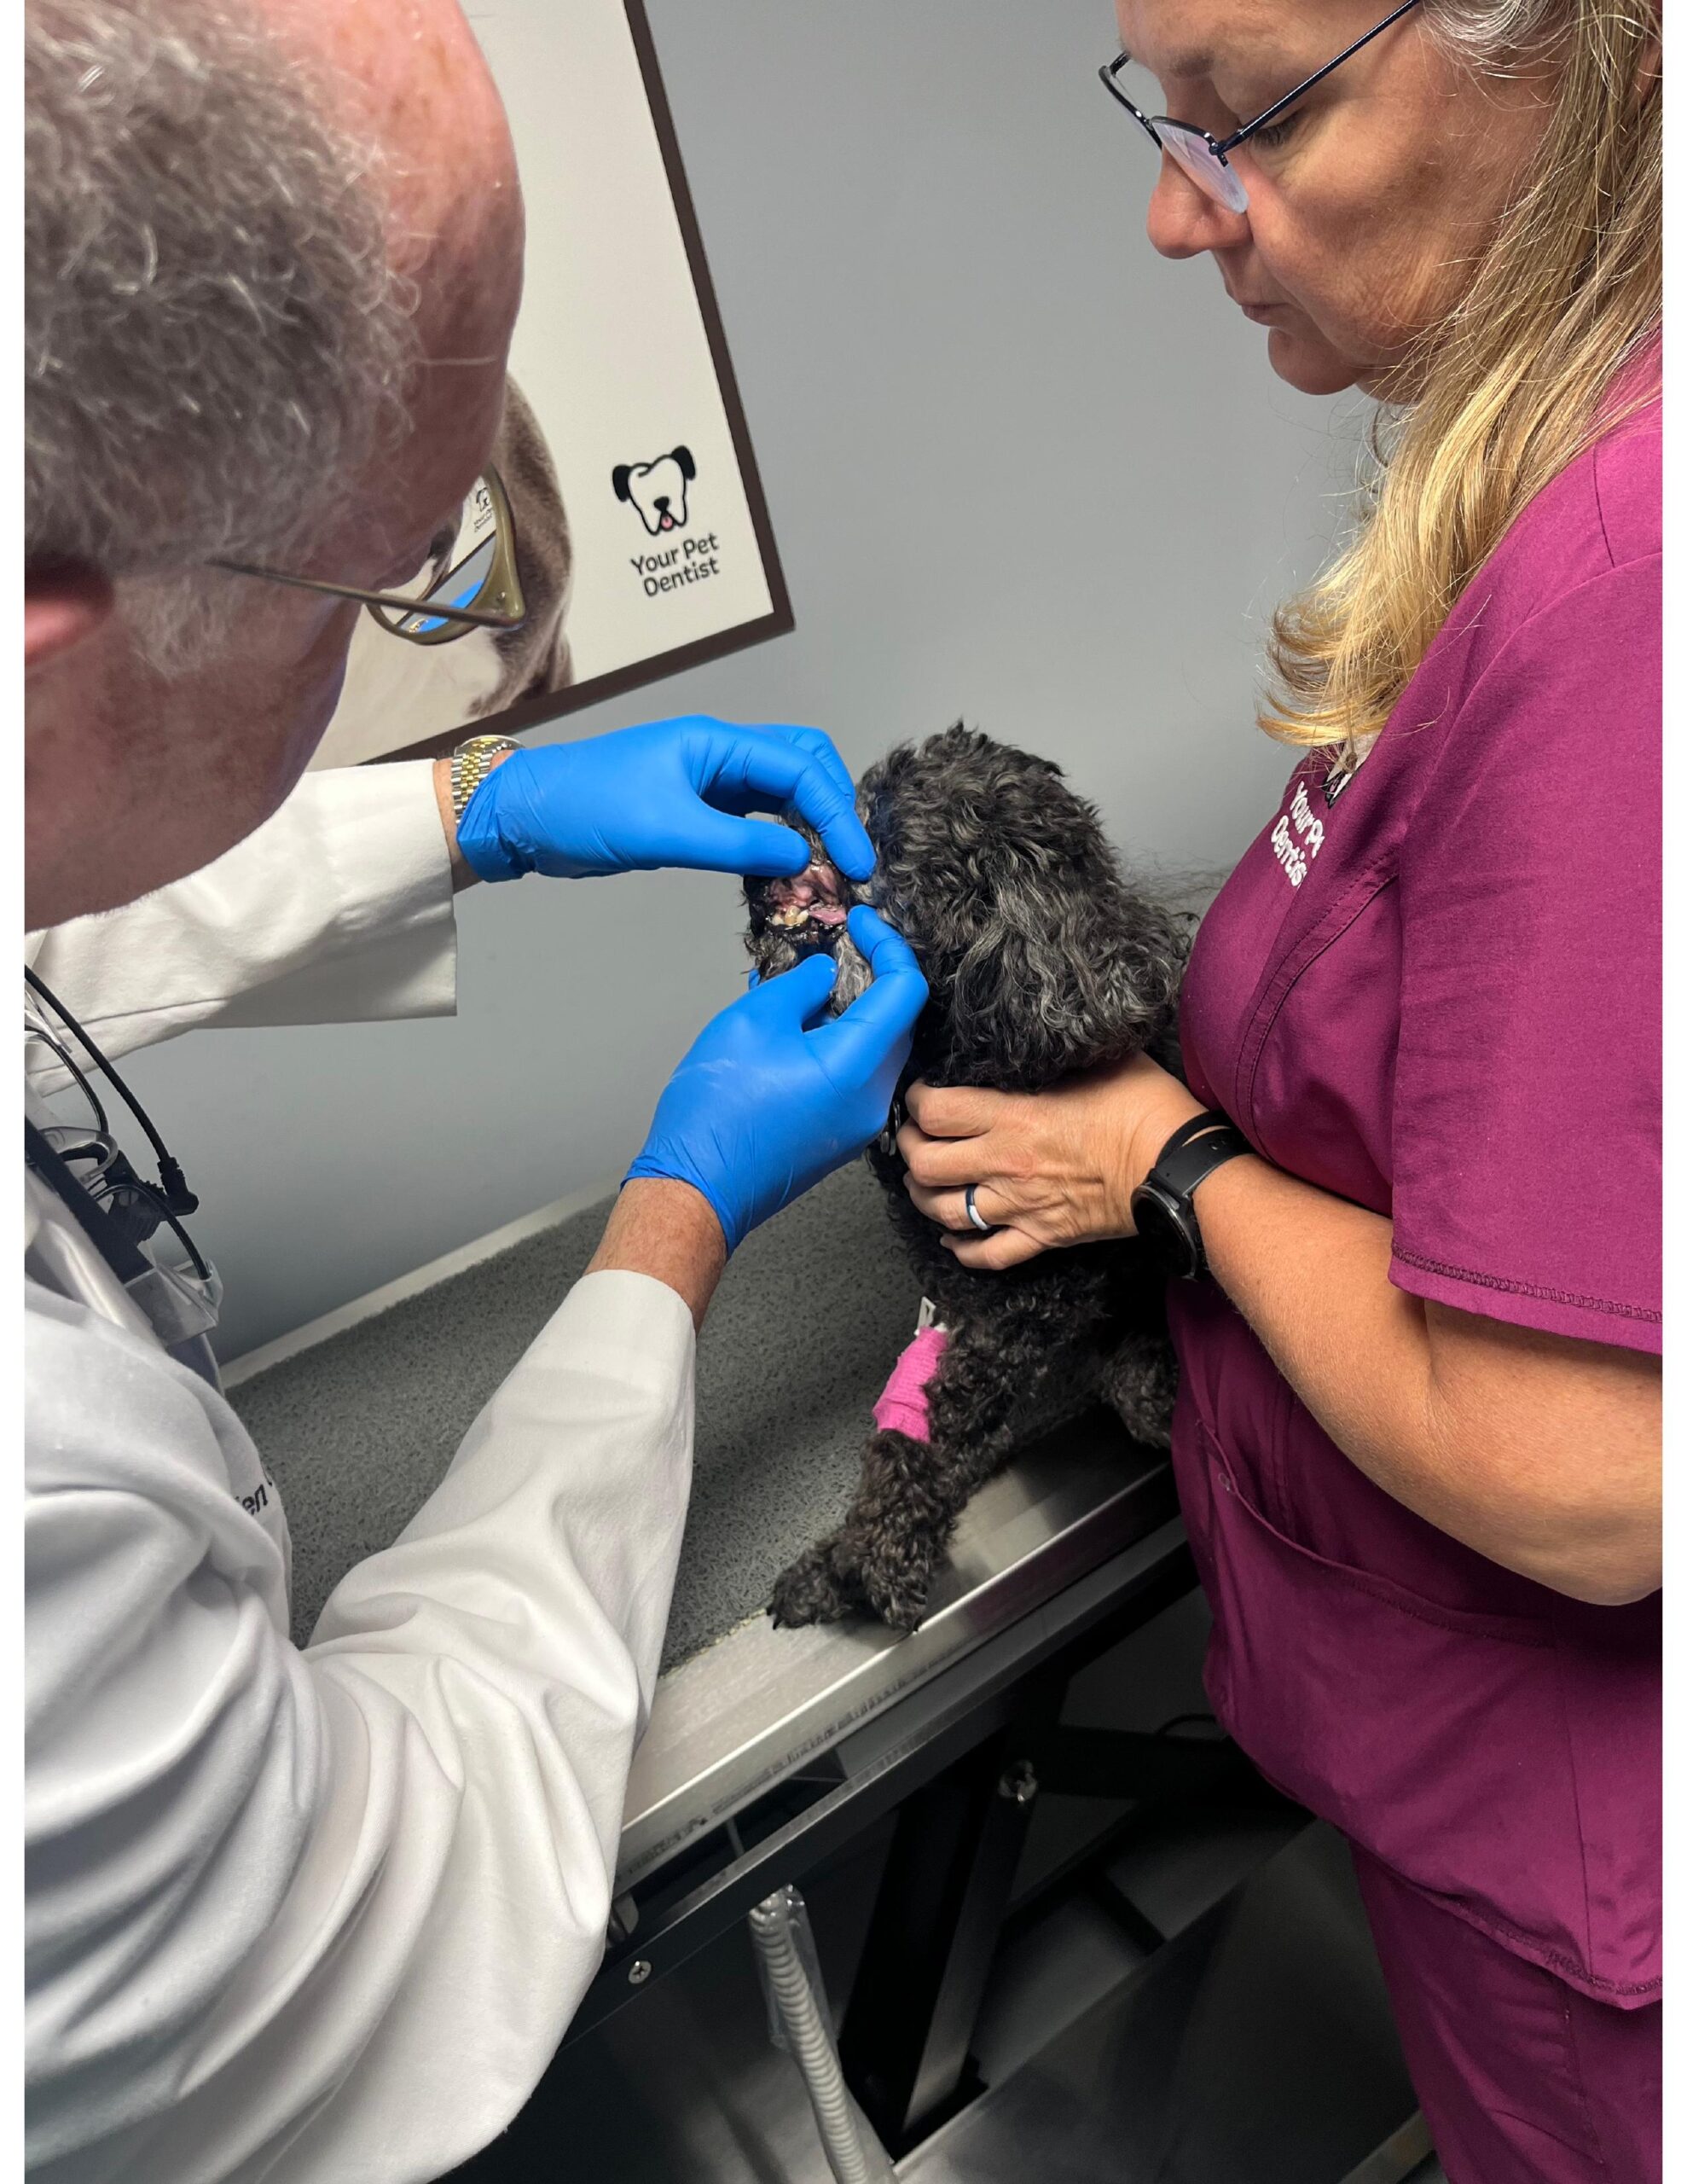 Dr. Greenfield gives a small black dog an oral examination.